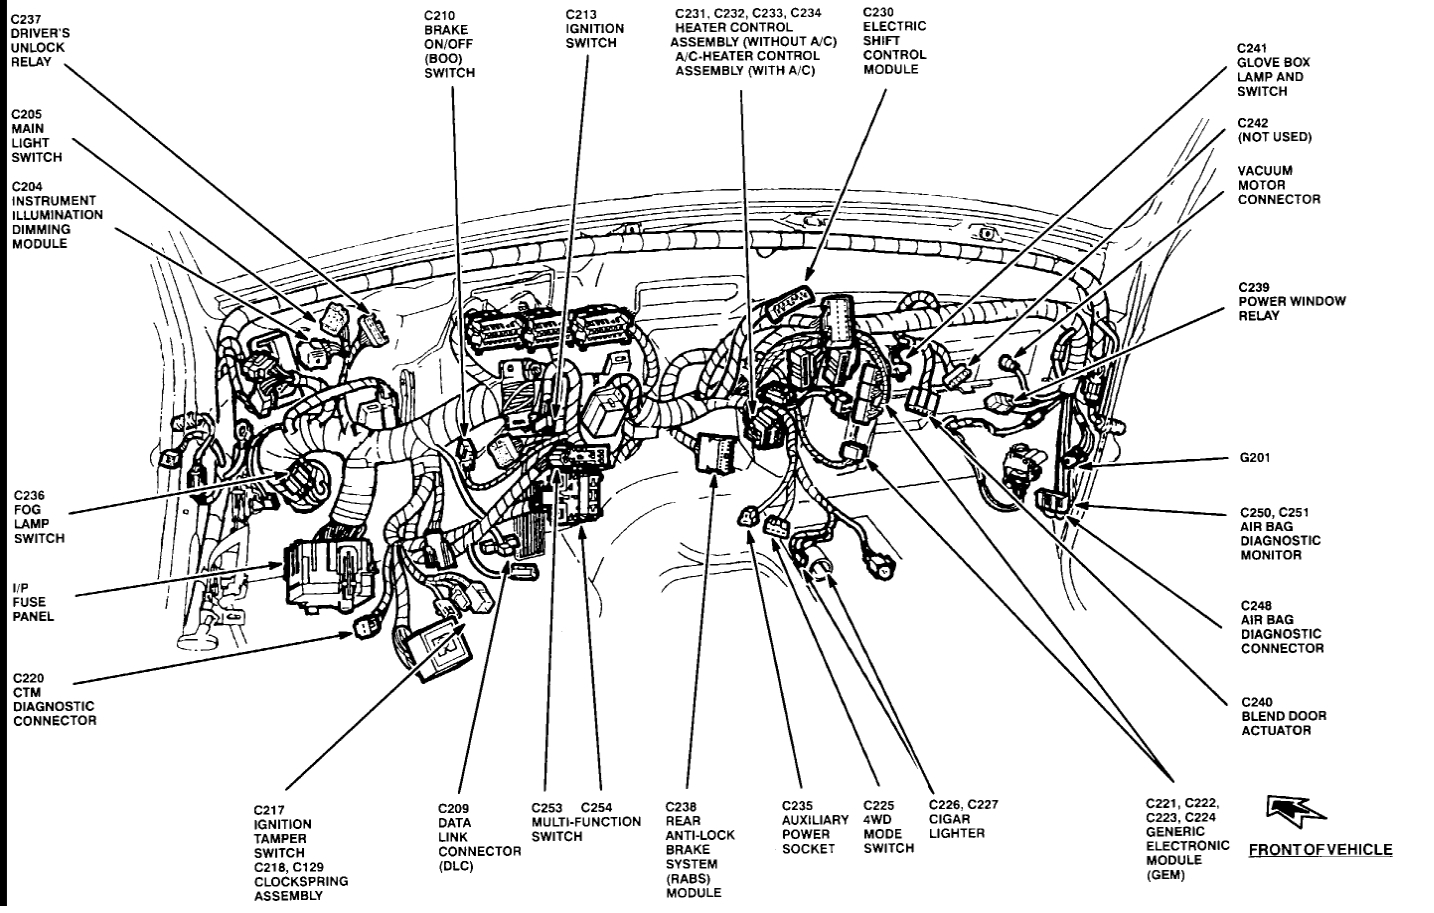 What Does the Gem System Do: I Pulled the Fuse There Is a ... 1996 ford expedition fuse panel diagram 